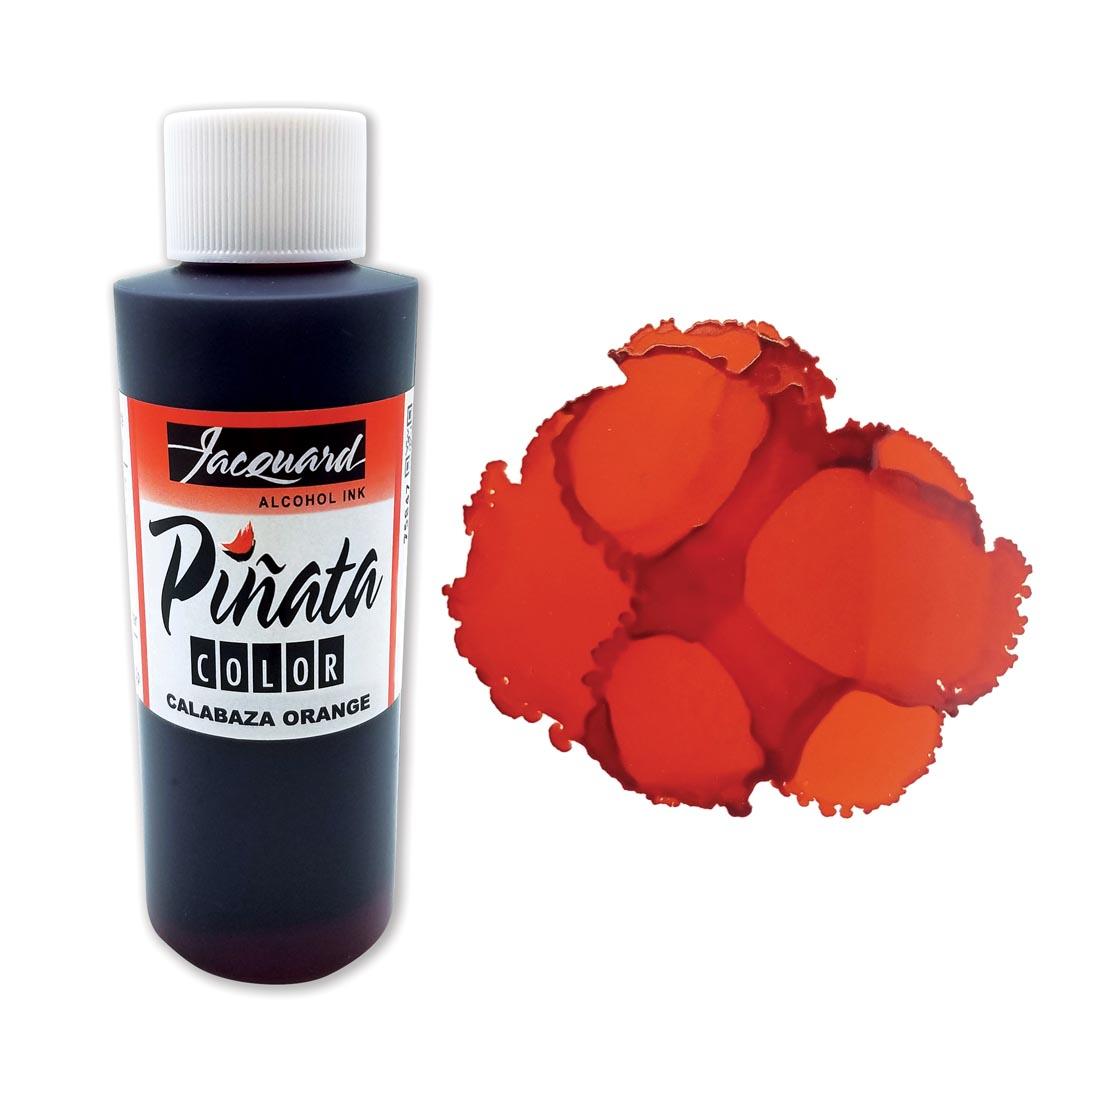 Bottle of Calabaza Orange Jacquard Pinata Color Alcohol Ink beside an example color swatch